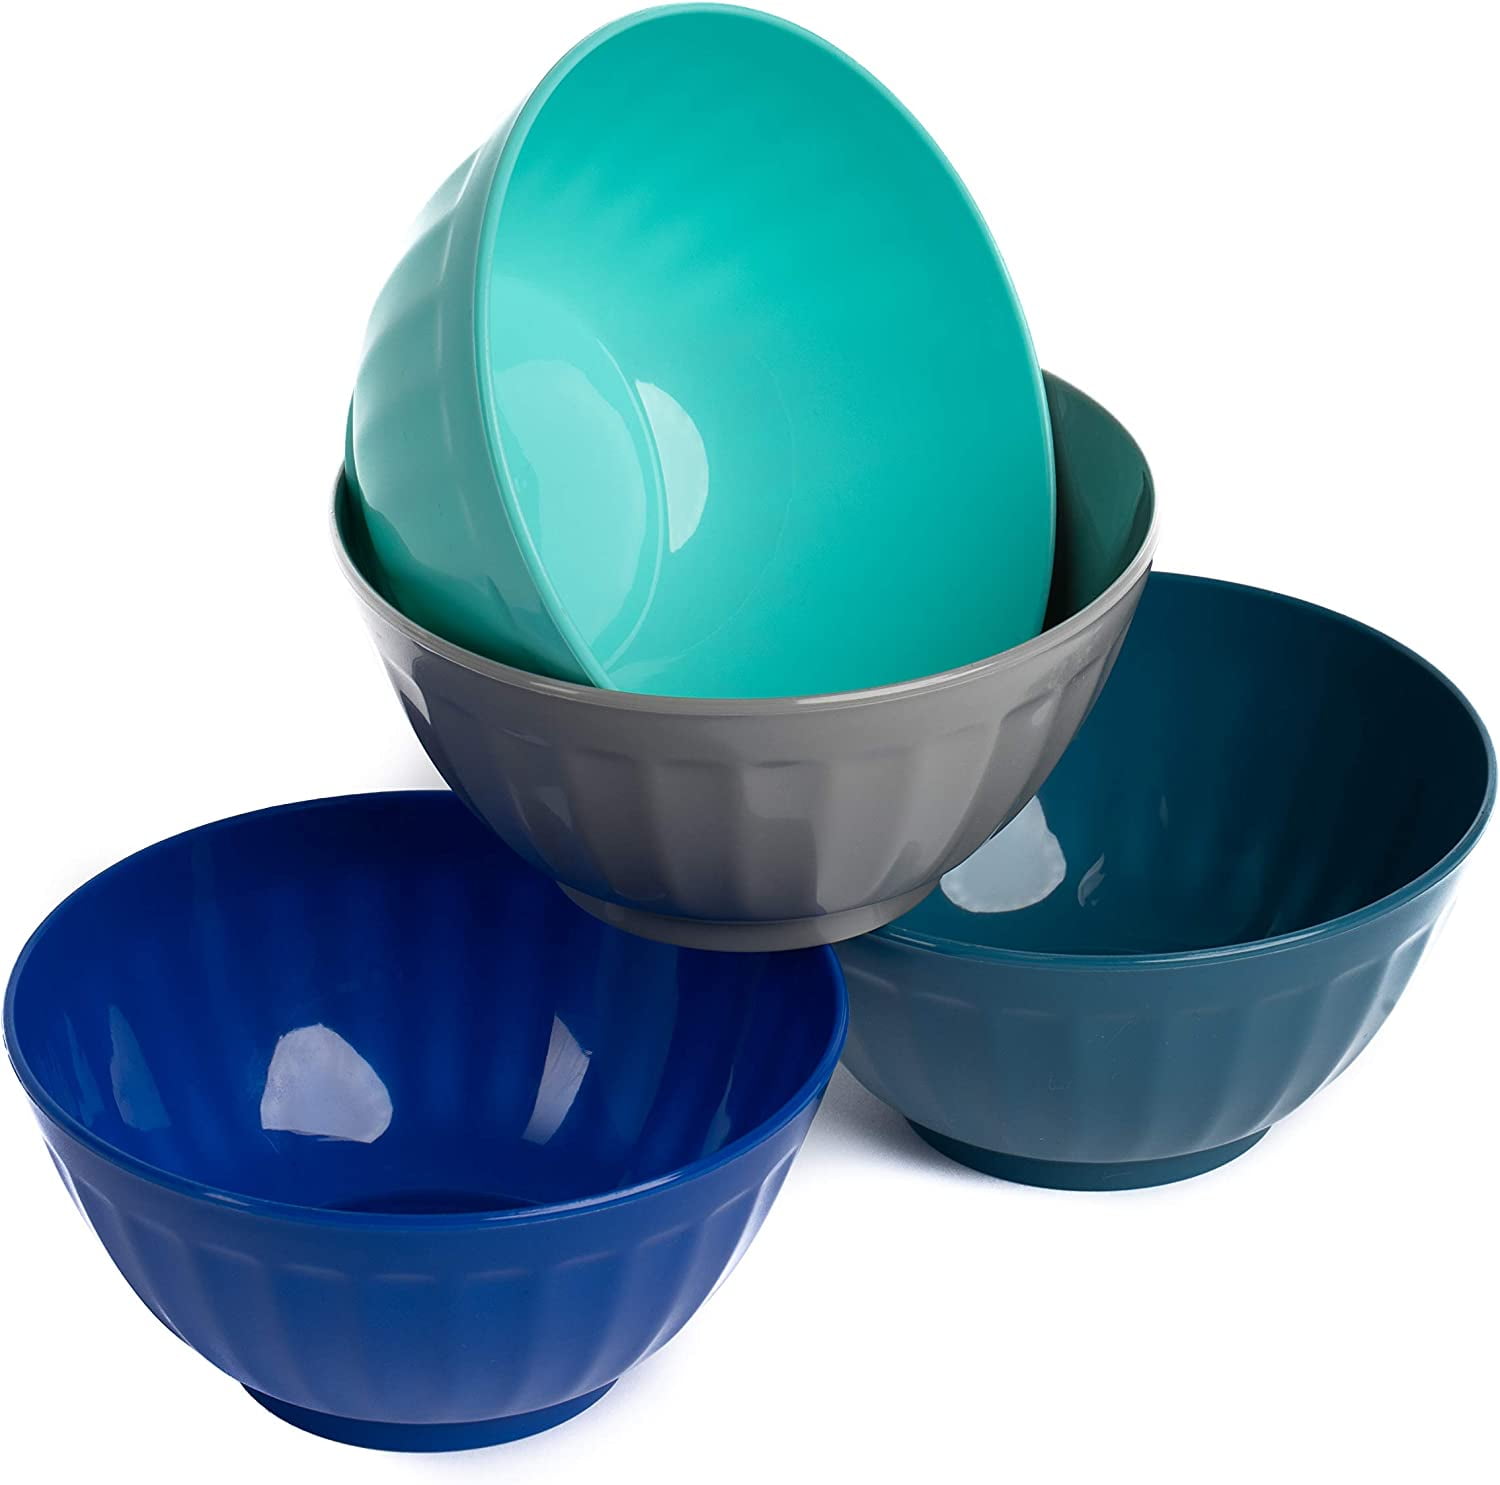 KX-WARE Plastic Bowls with Lids set of 6 - Unbreakable and Reusable 6-inch  Plastic Cereal/Soup/Salad Bowls Multicolor, Microwave/Dishwasher Safe, BPA